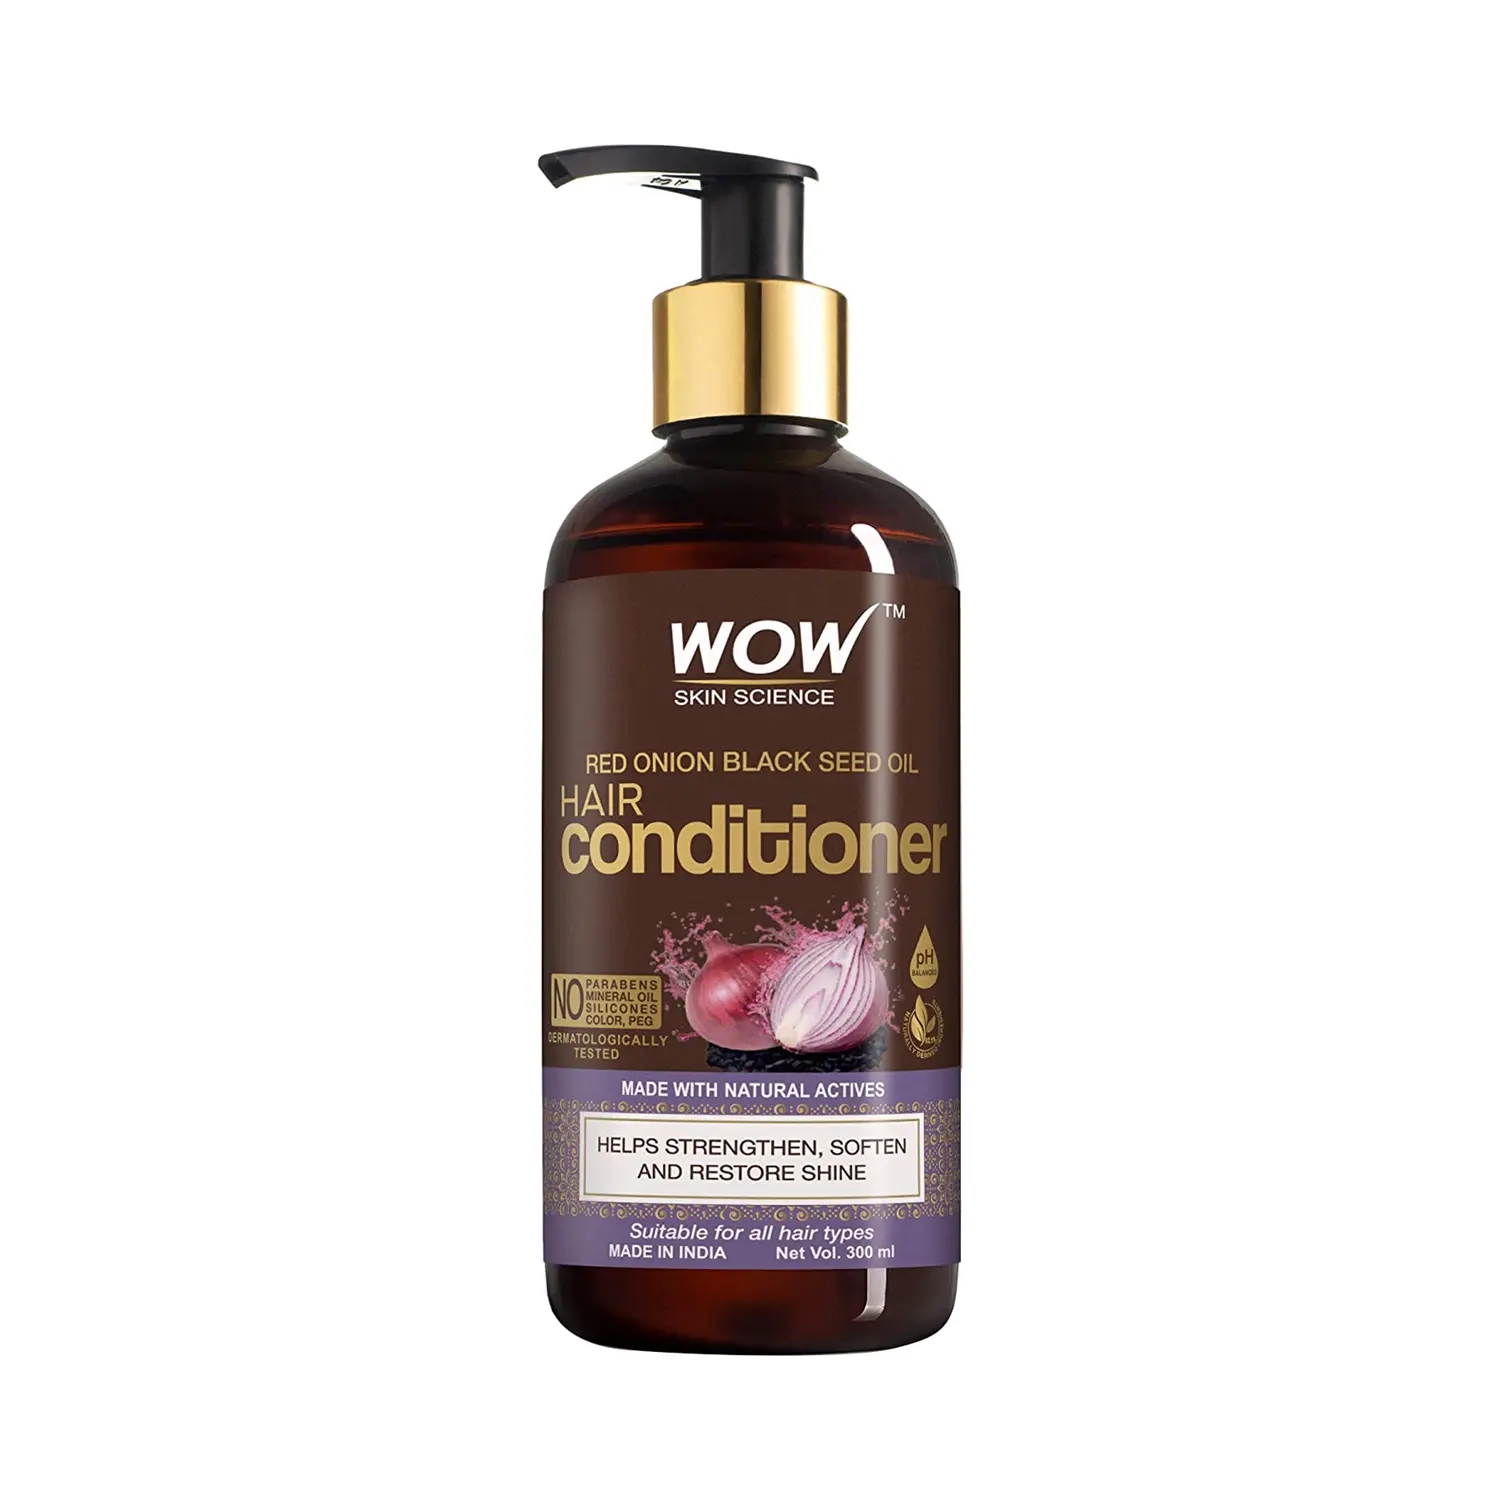 WOW SKIN SCIENCE | WOW SKIN SCIENCE Onion Black Seed Oil Hair Conditioner (300ml)